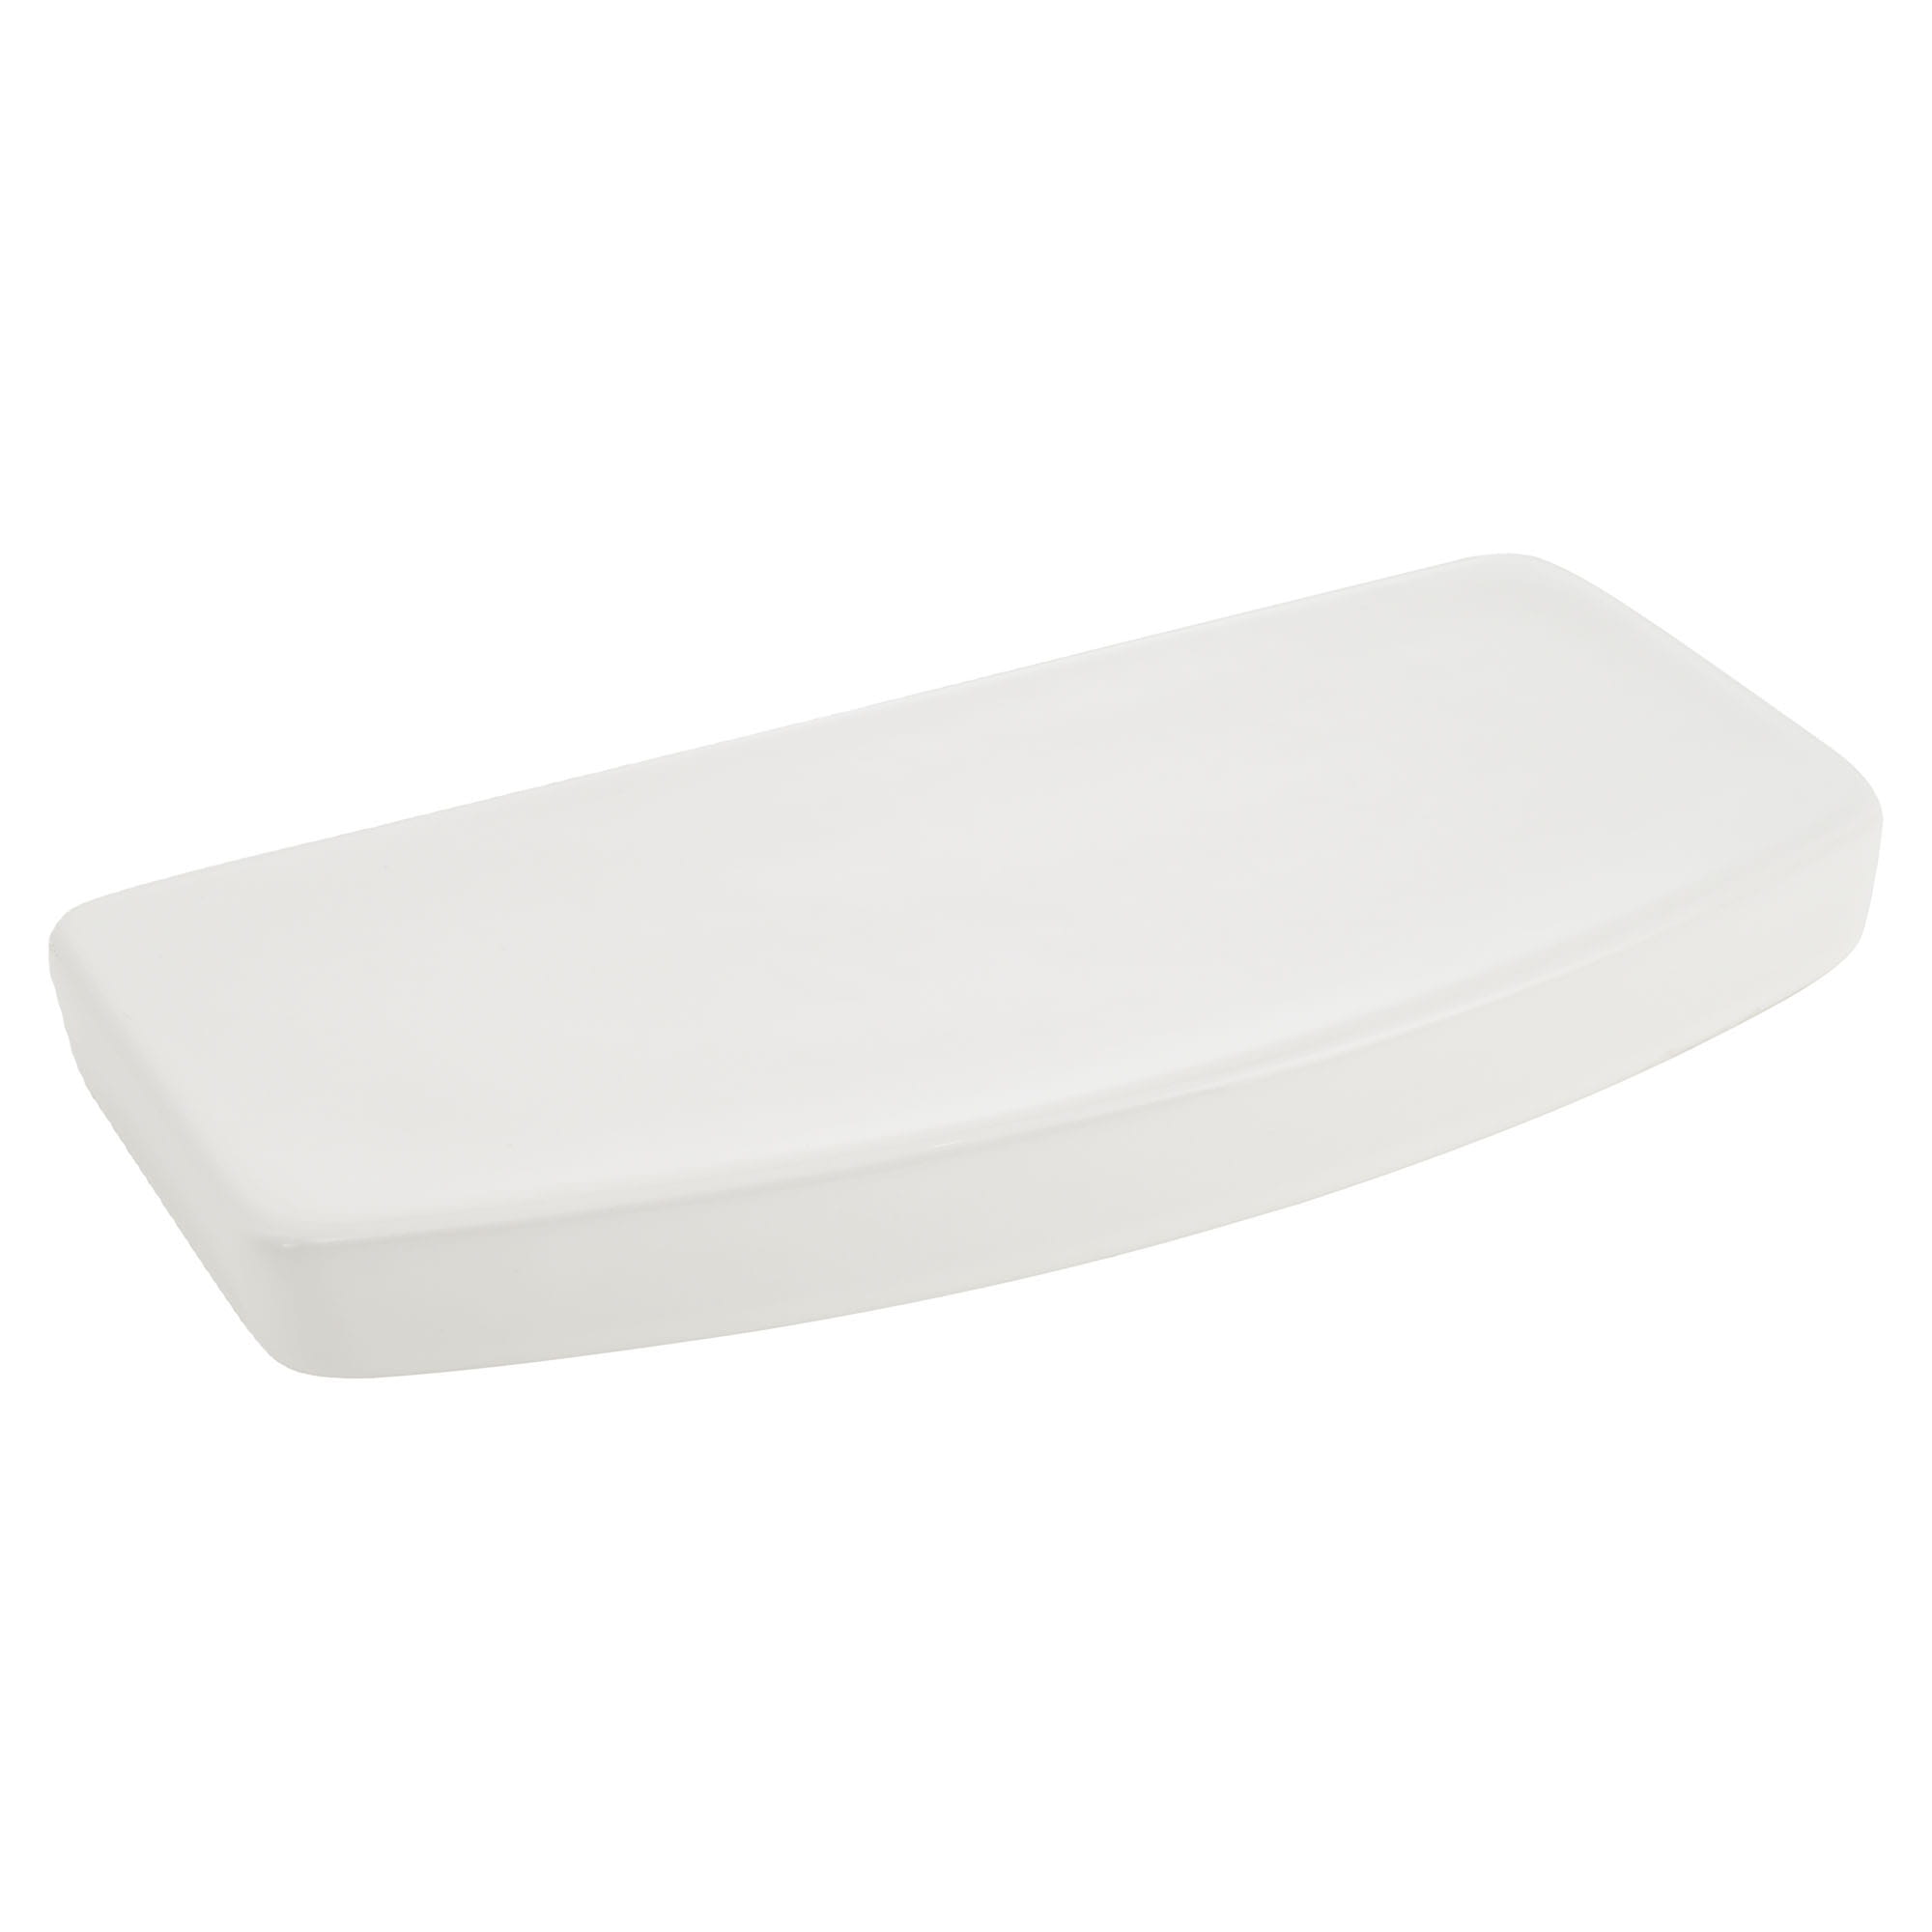 Townsend VorMax One Piece Toilet Tank Cover WHITE